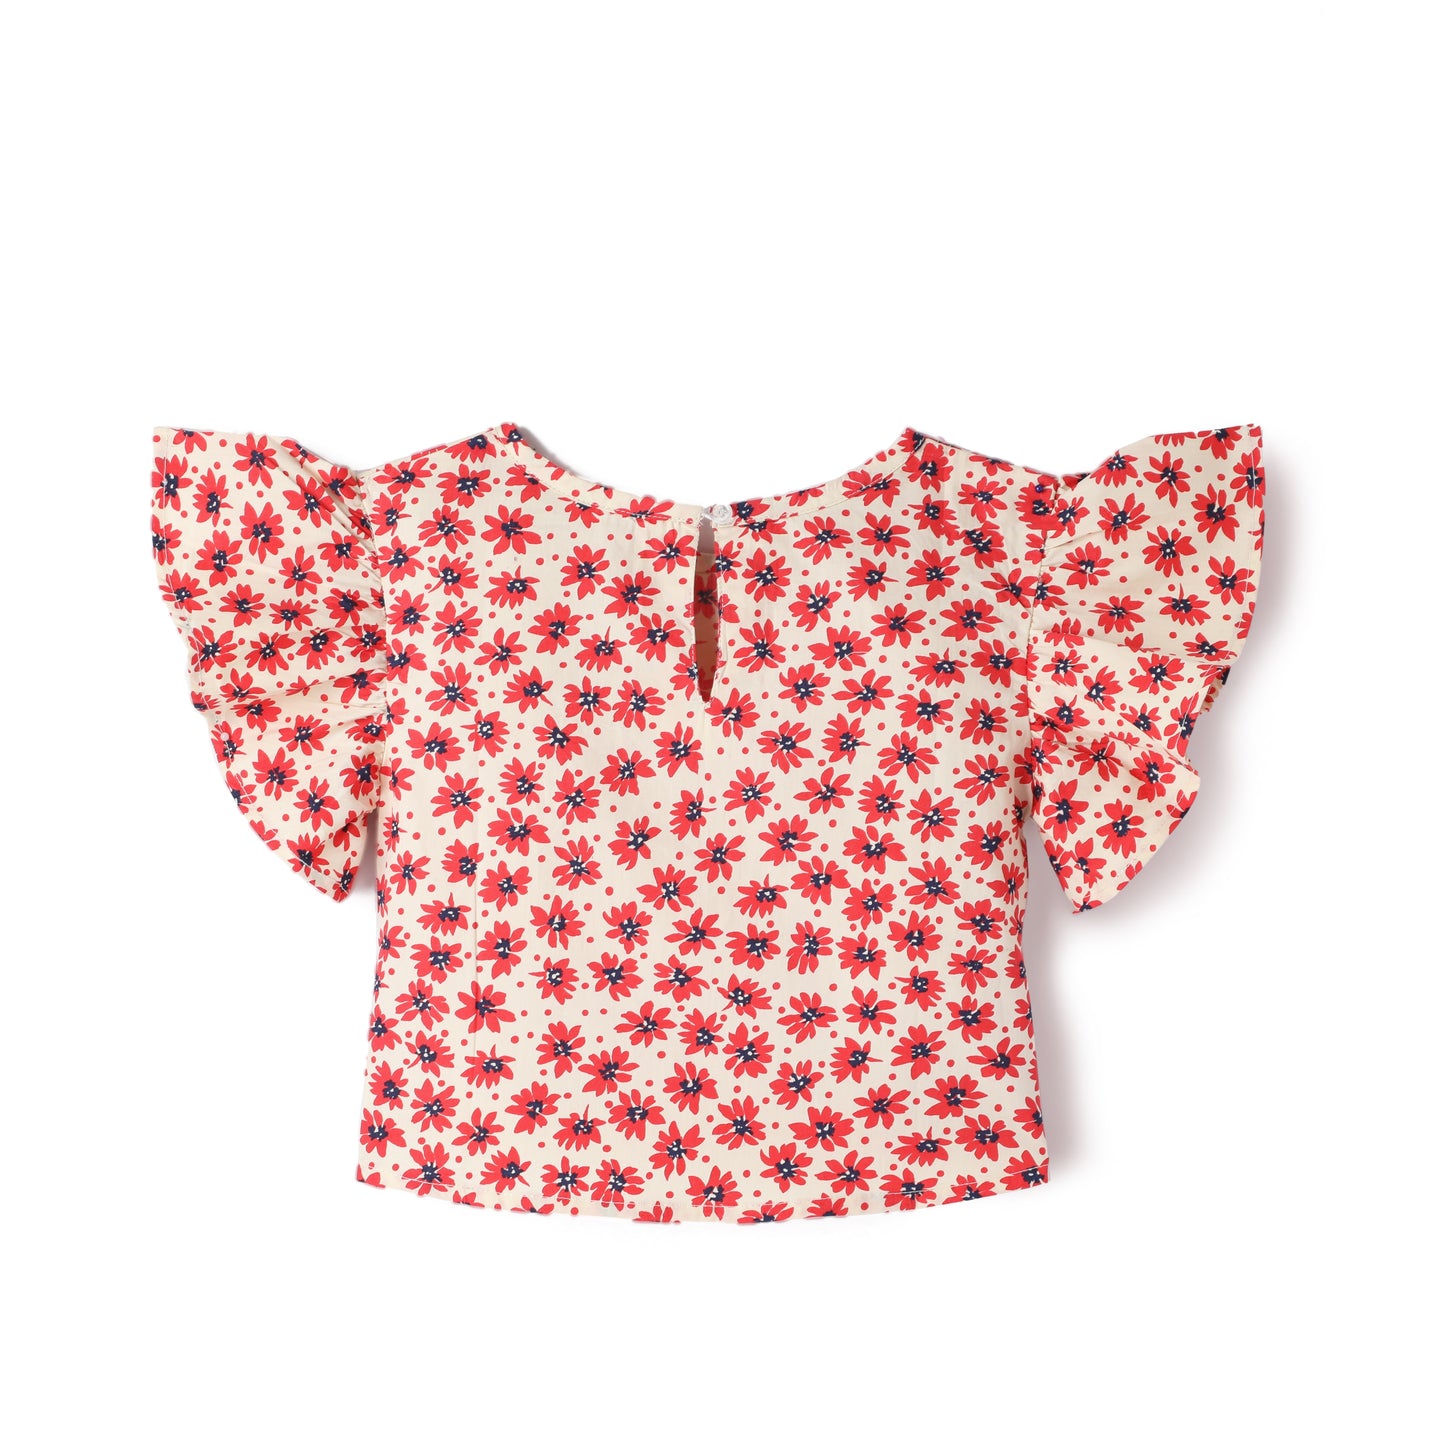 Red Premium Cotton Polka Dots Printed with Bio Finish Flutter Sleeves Top & Shorts Co-ord Set for Girls